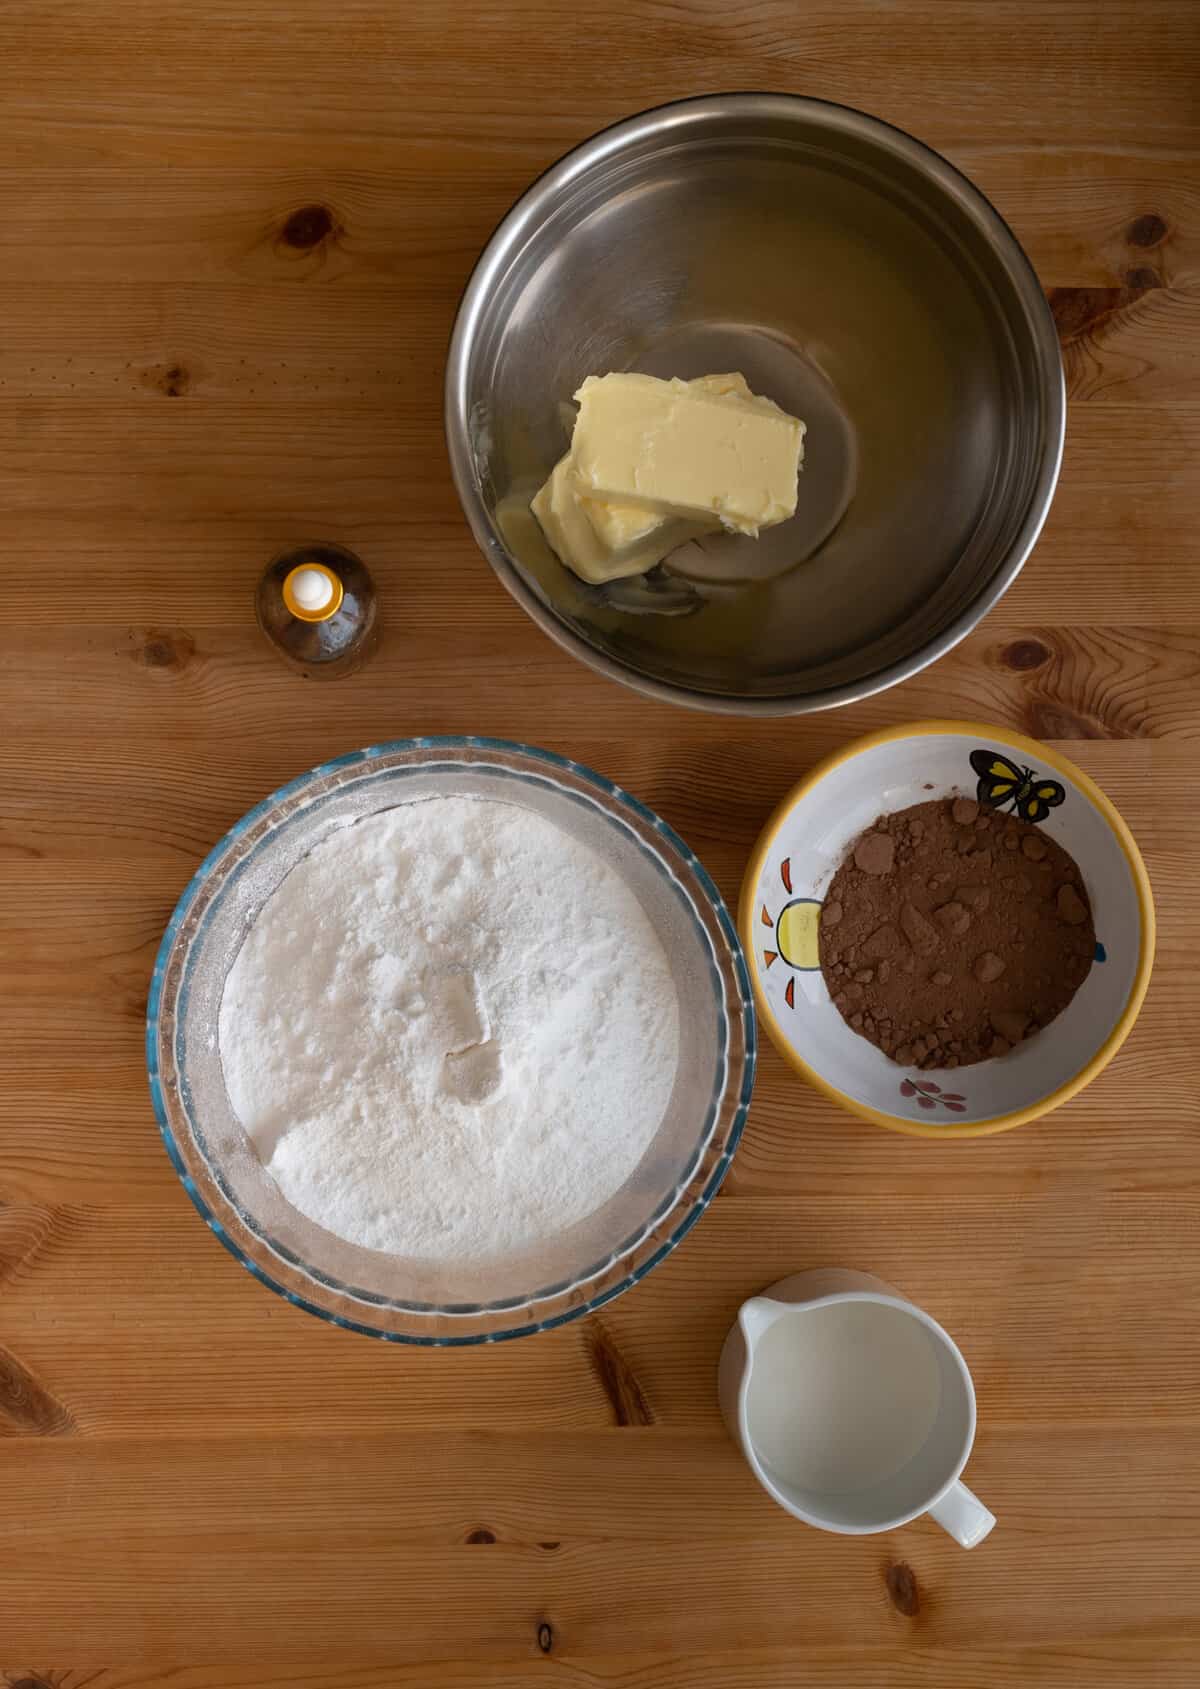 Ingredients in chocolate buttercream, stainless steel bowl with yellow butter, small bowl filled with confectionary sugar, and cocoa powder